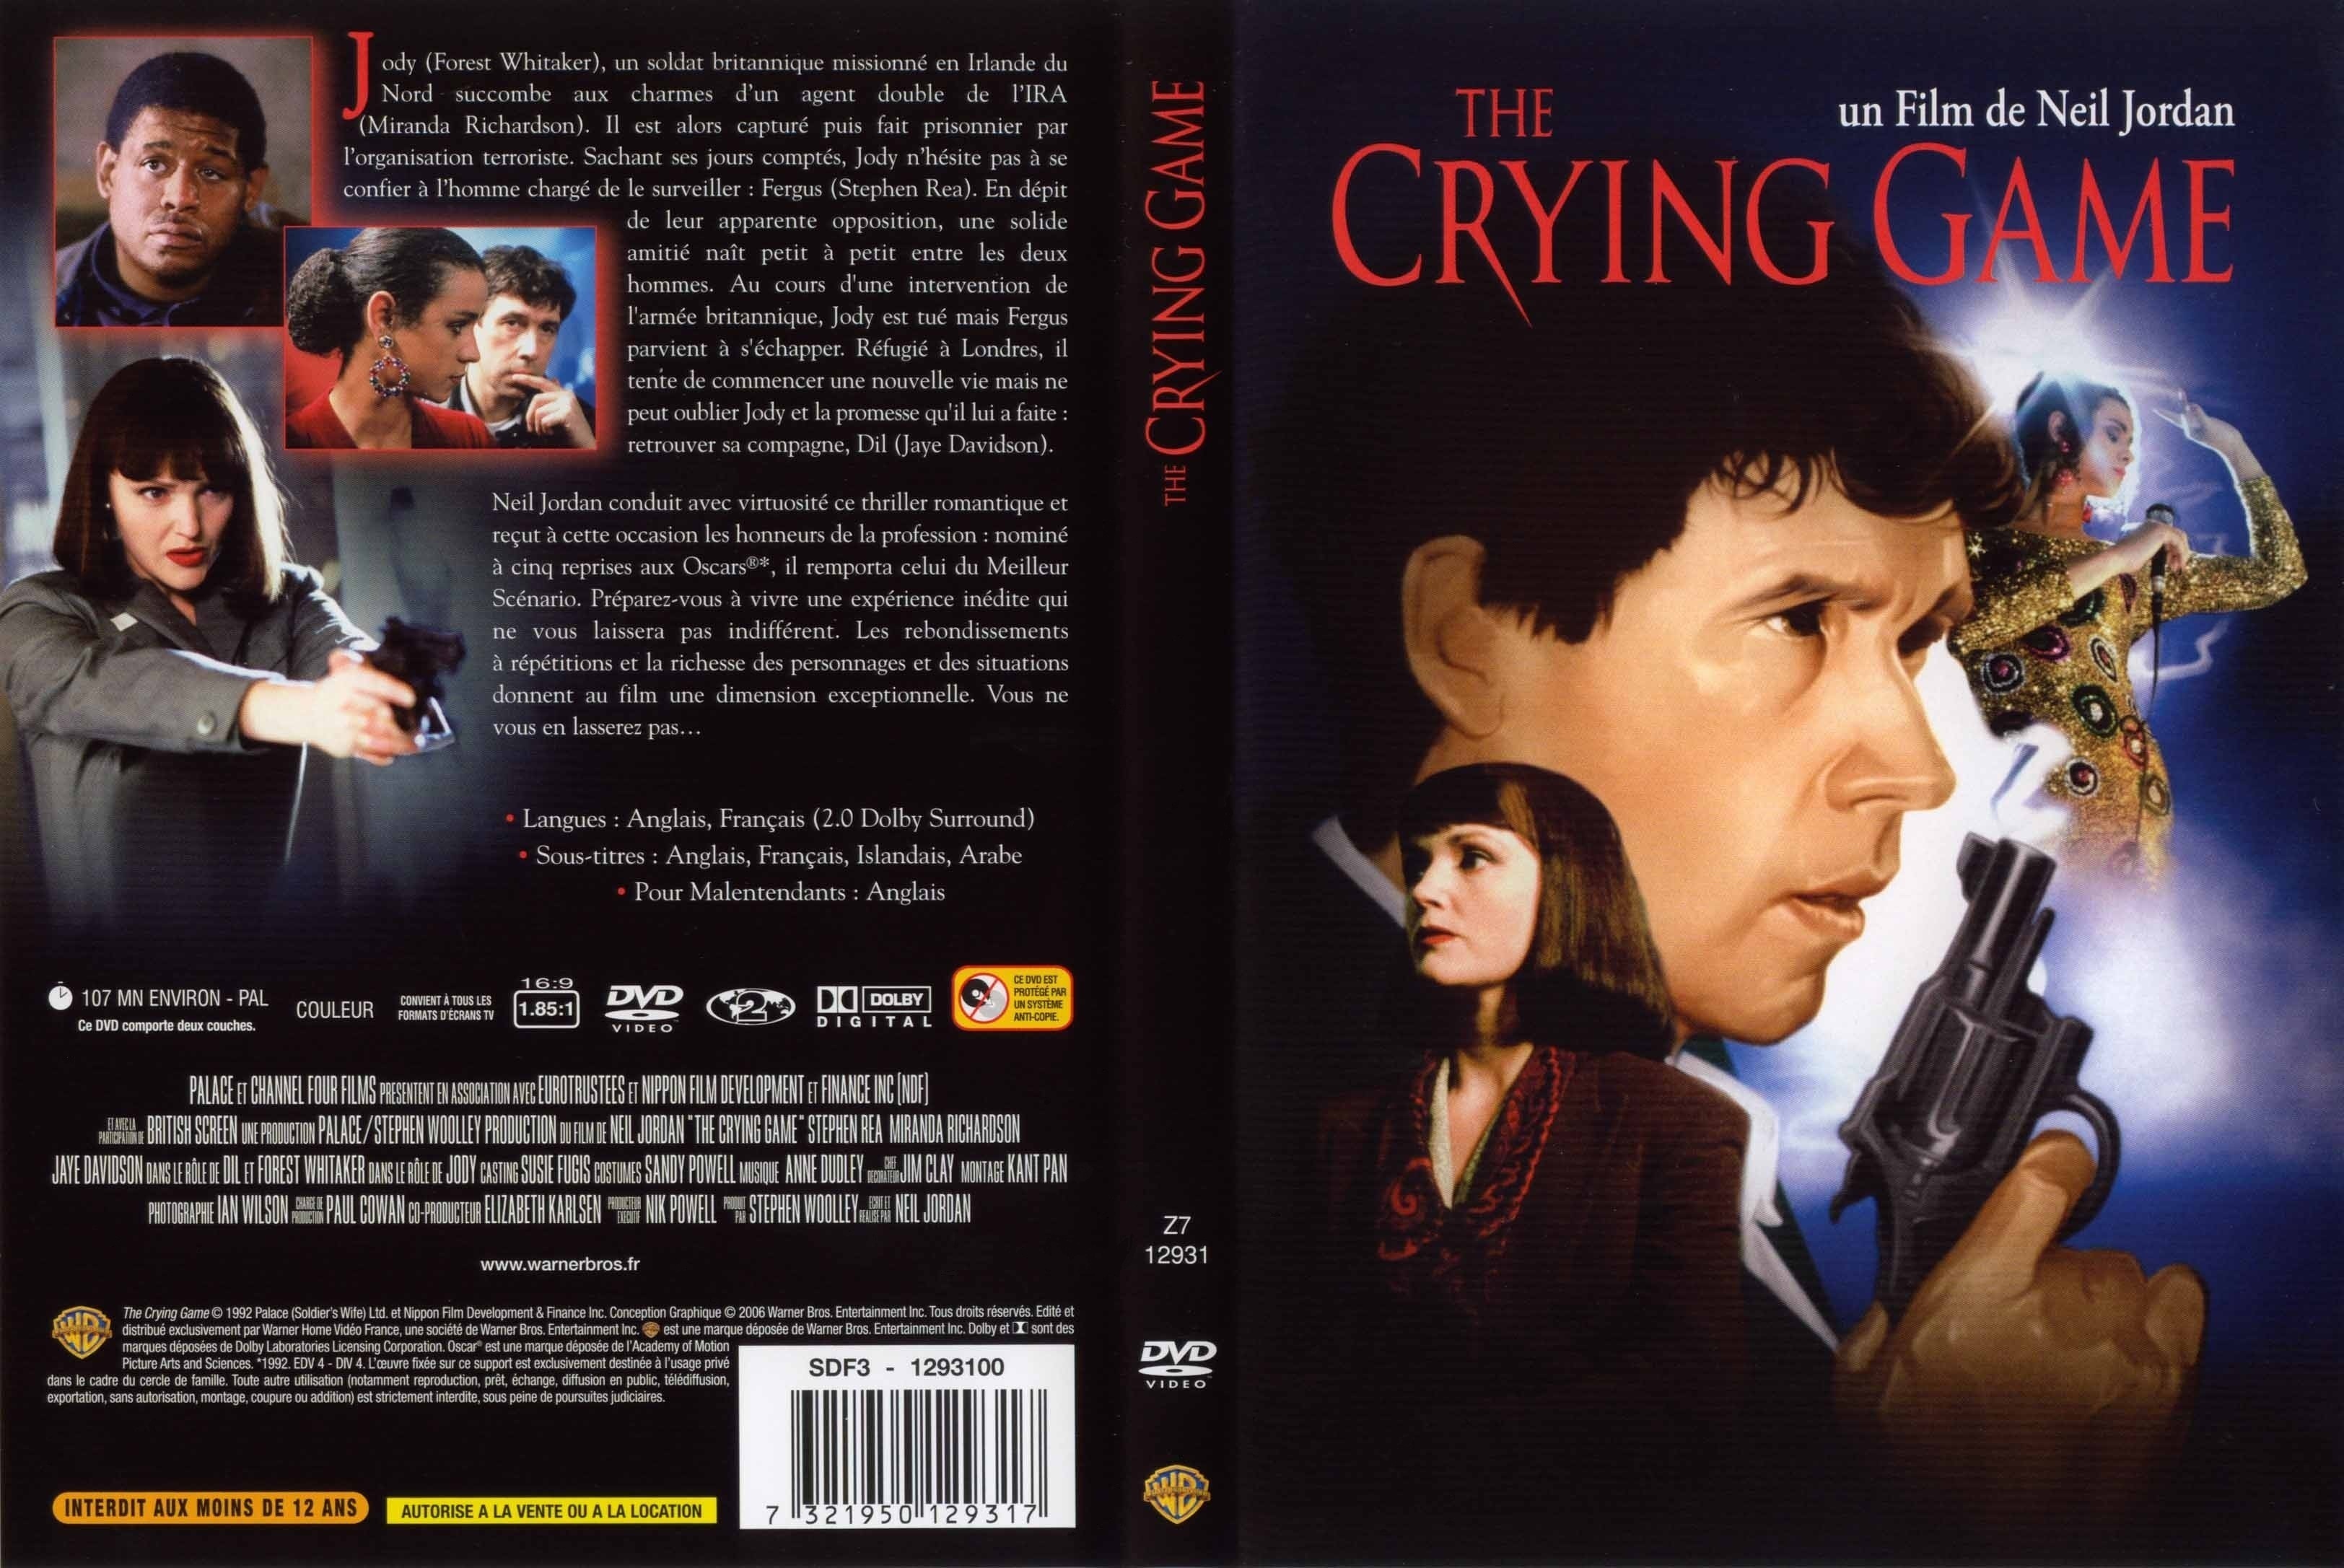 Jaquette DVD The crying game